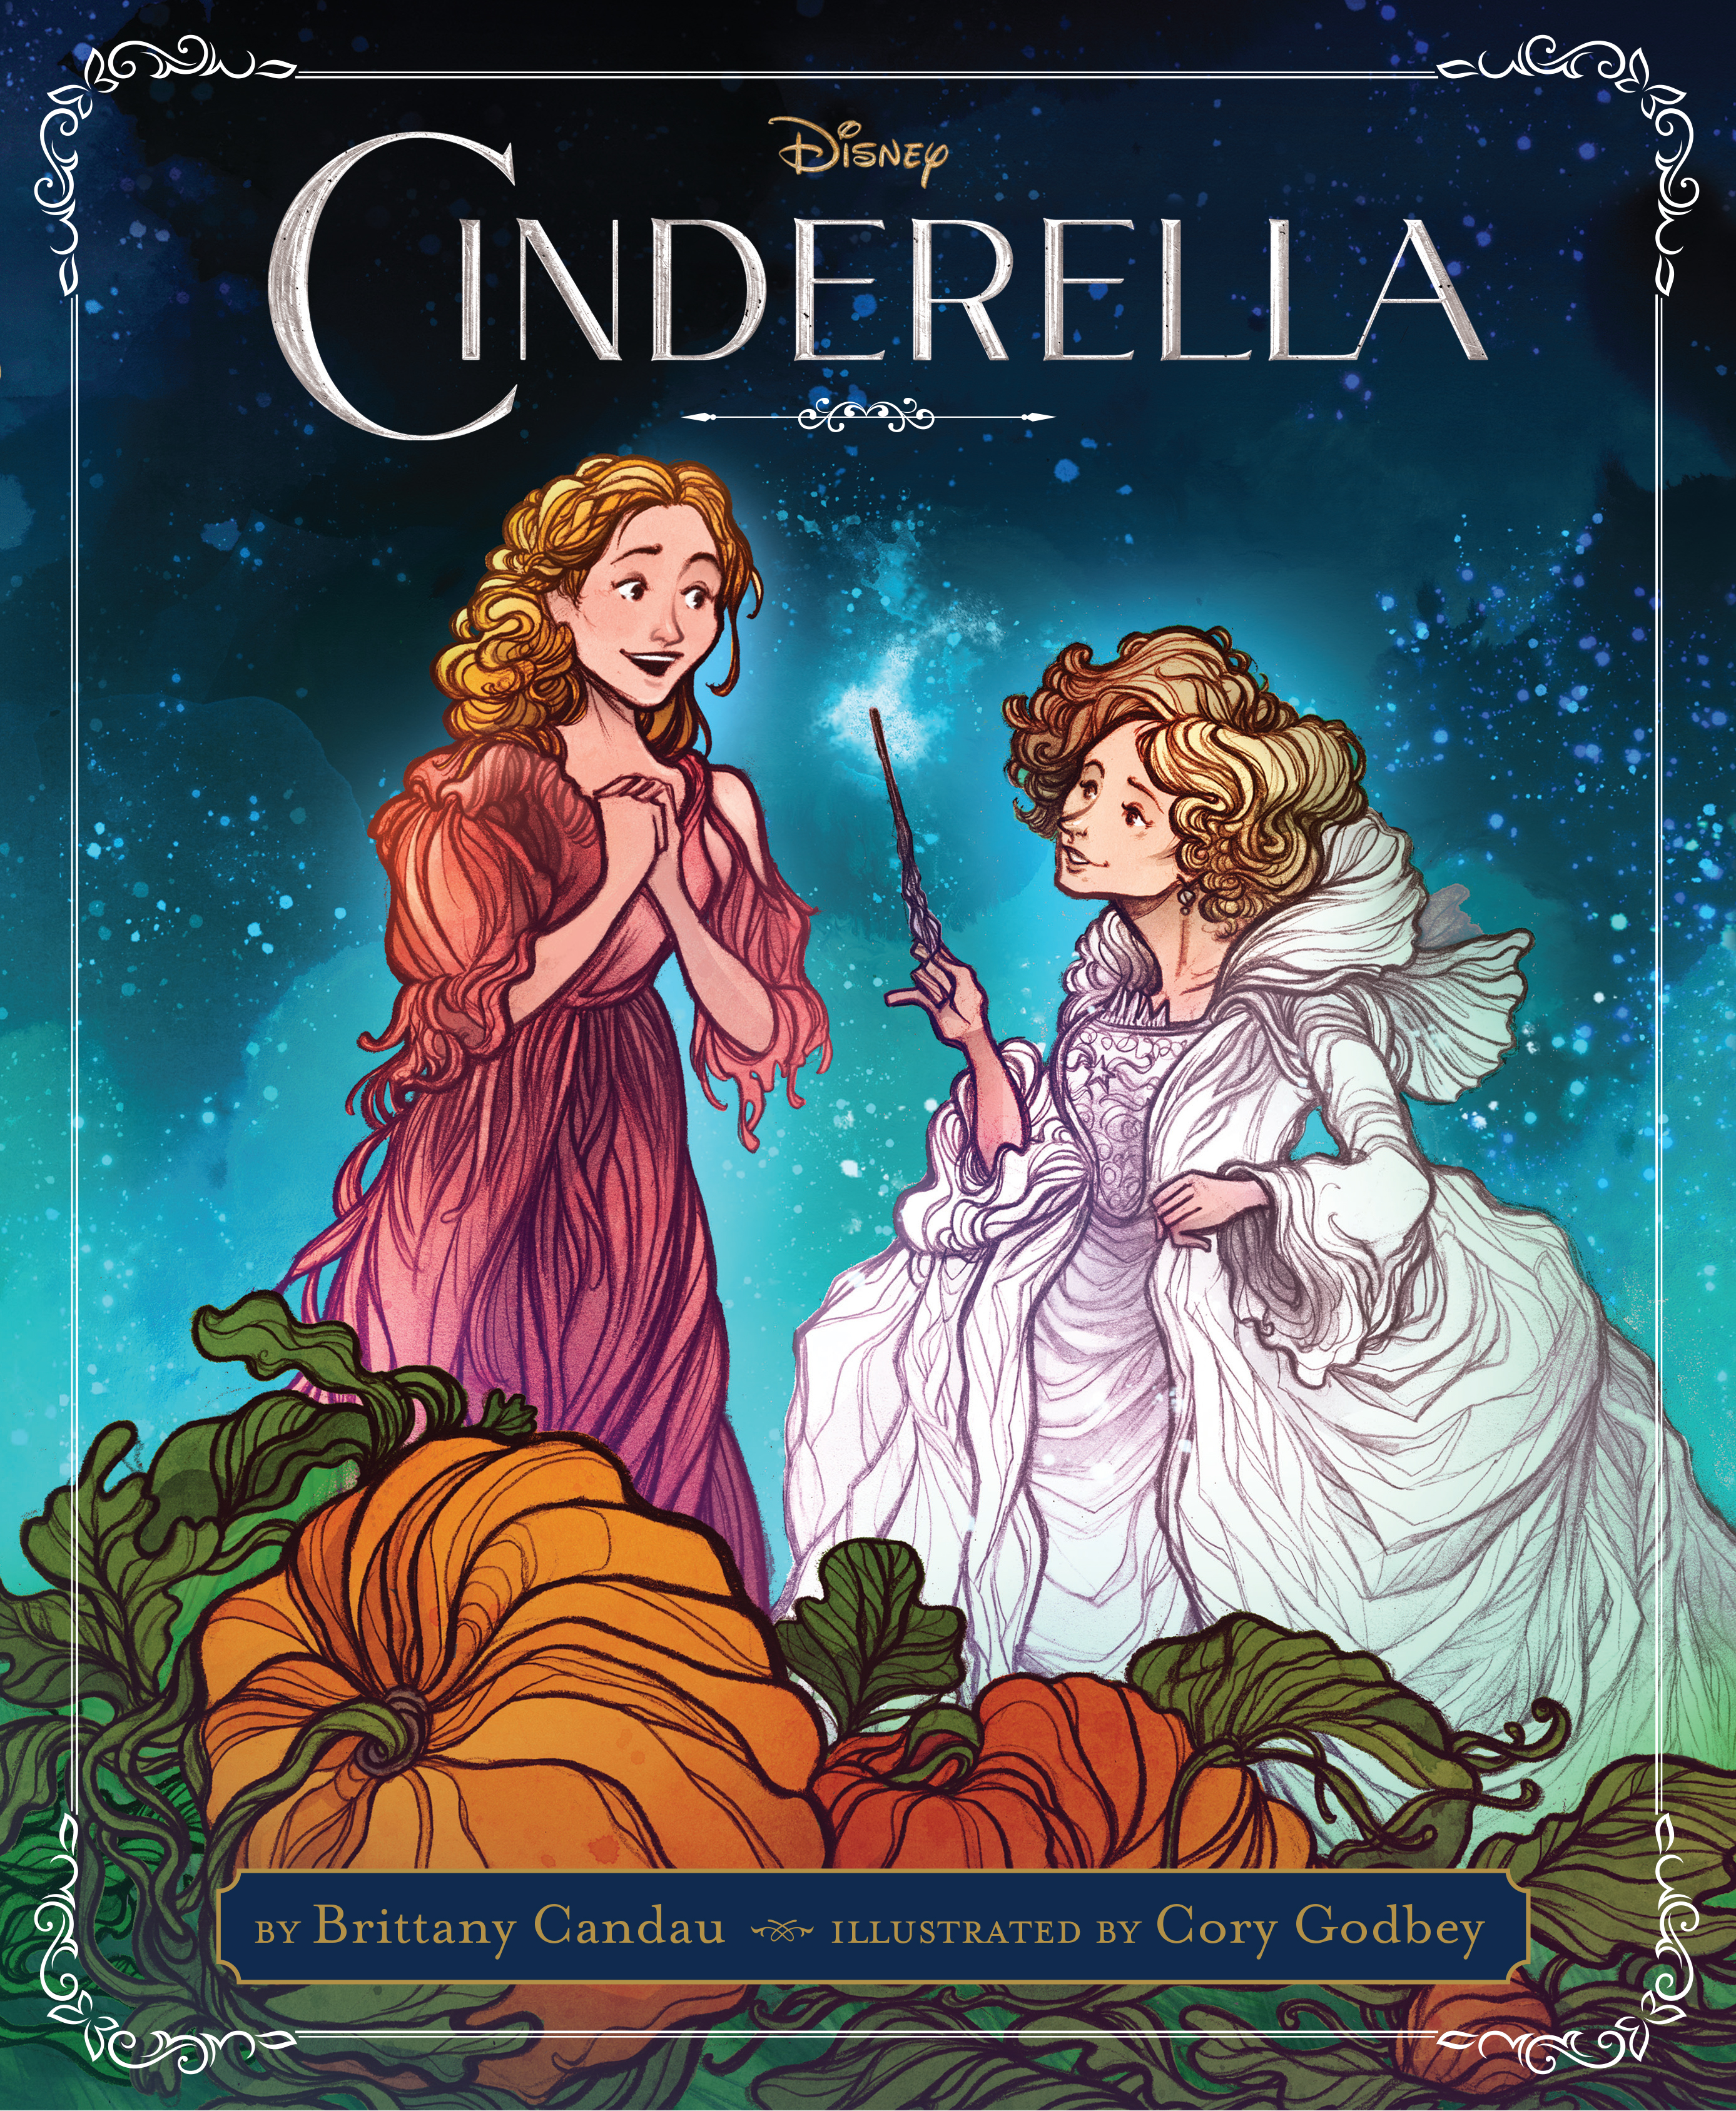 a book review about cinderella